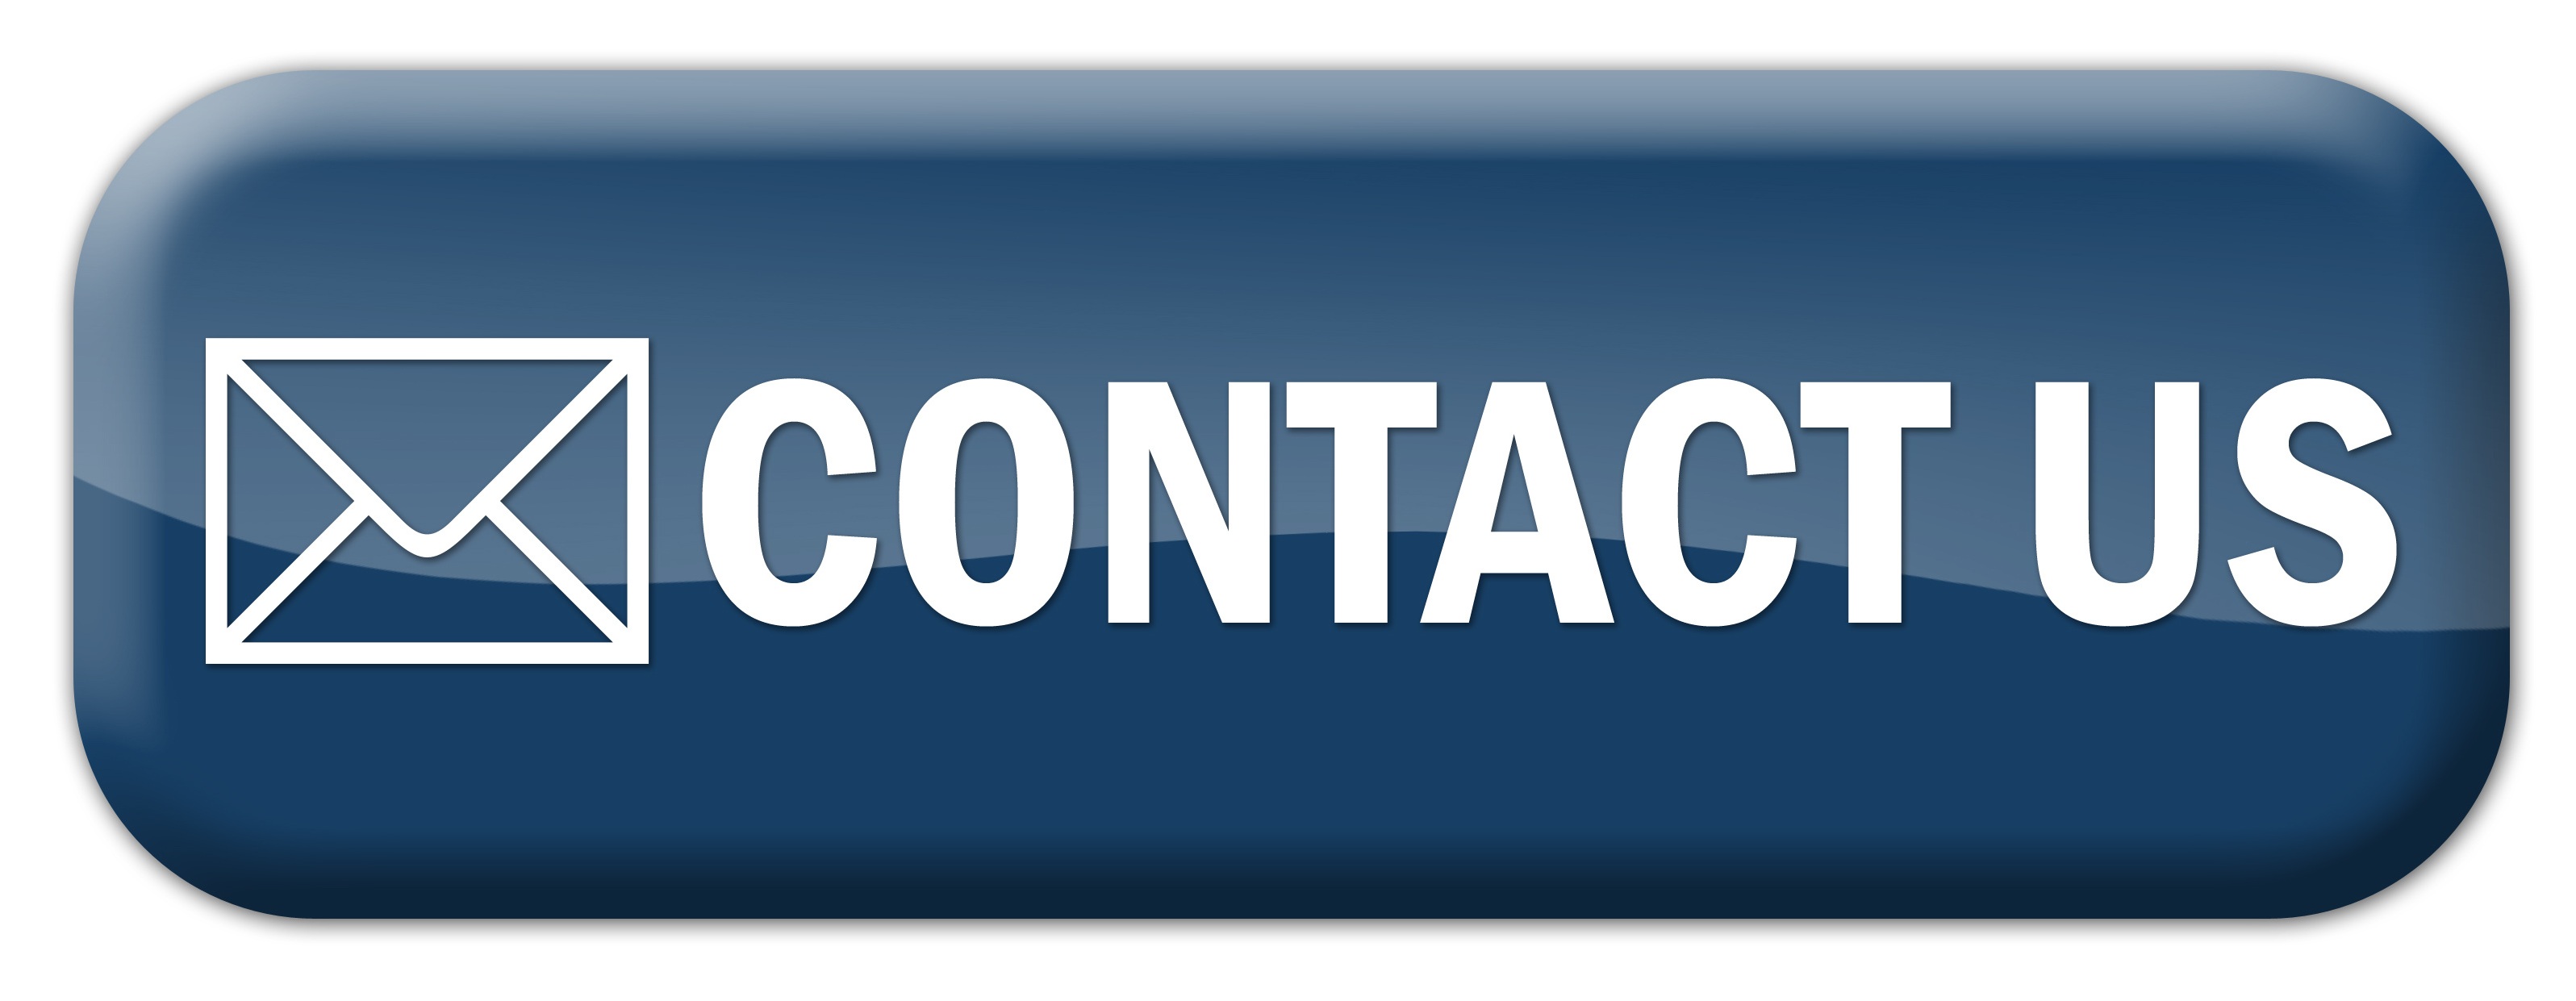 Contact Us Email Button